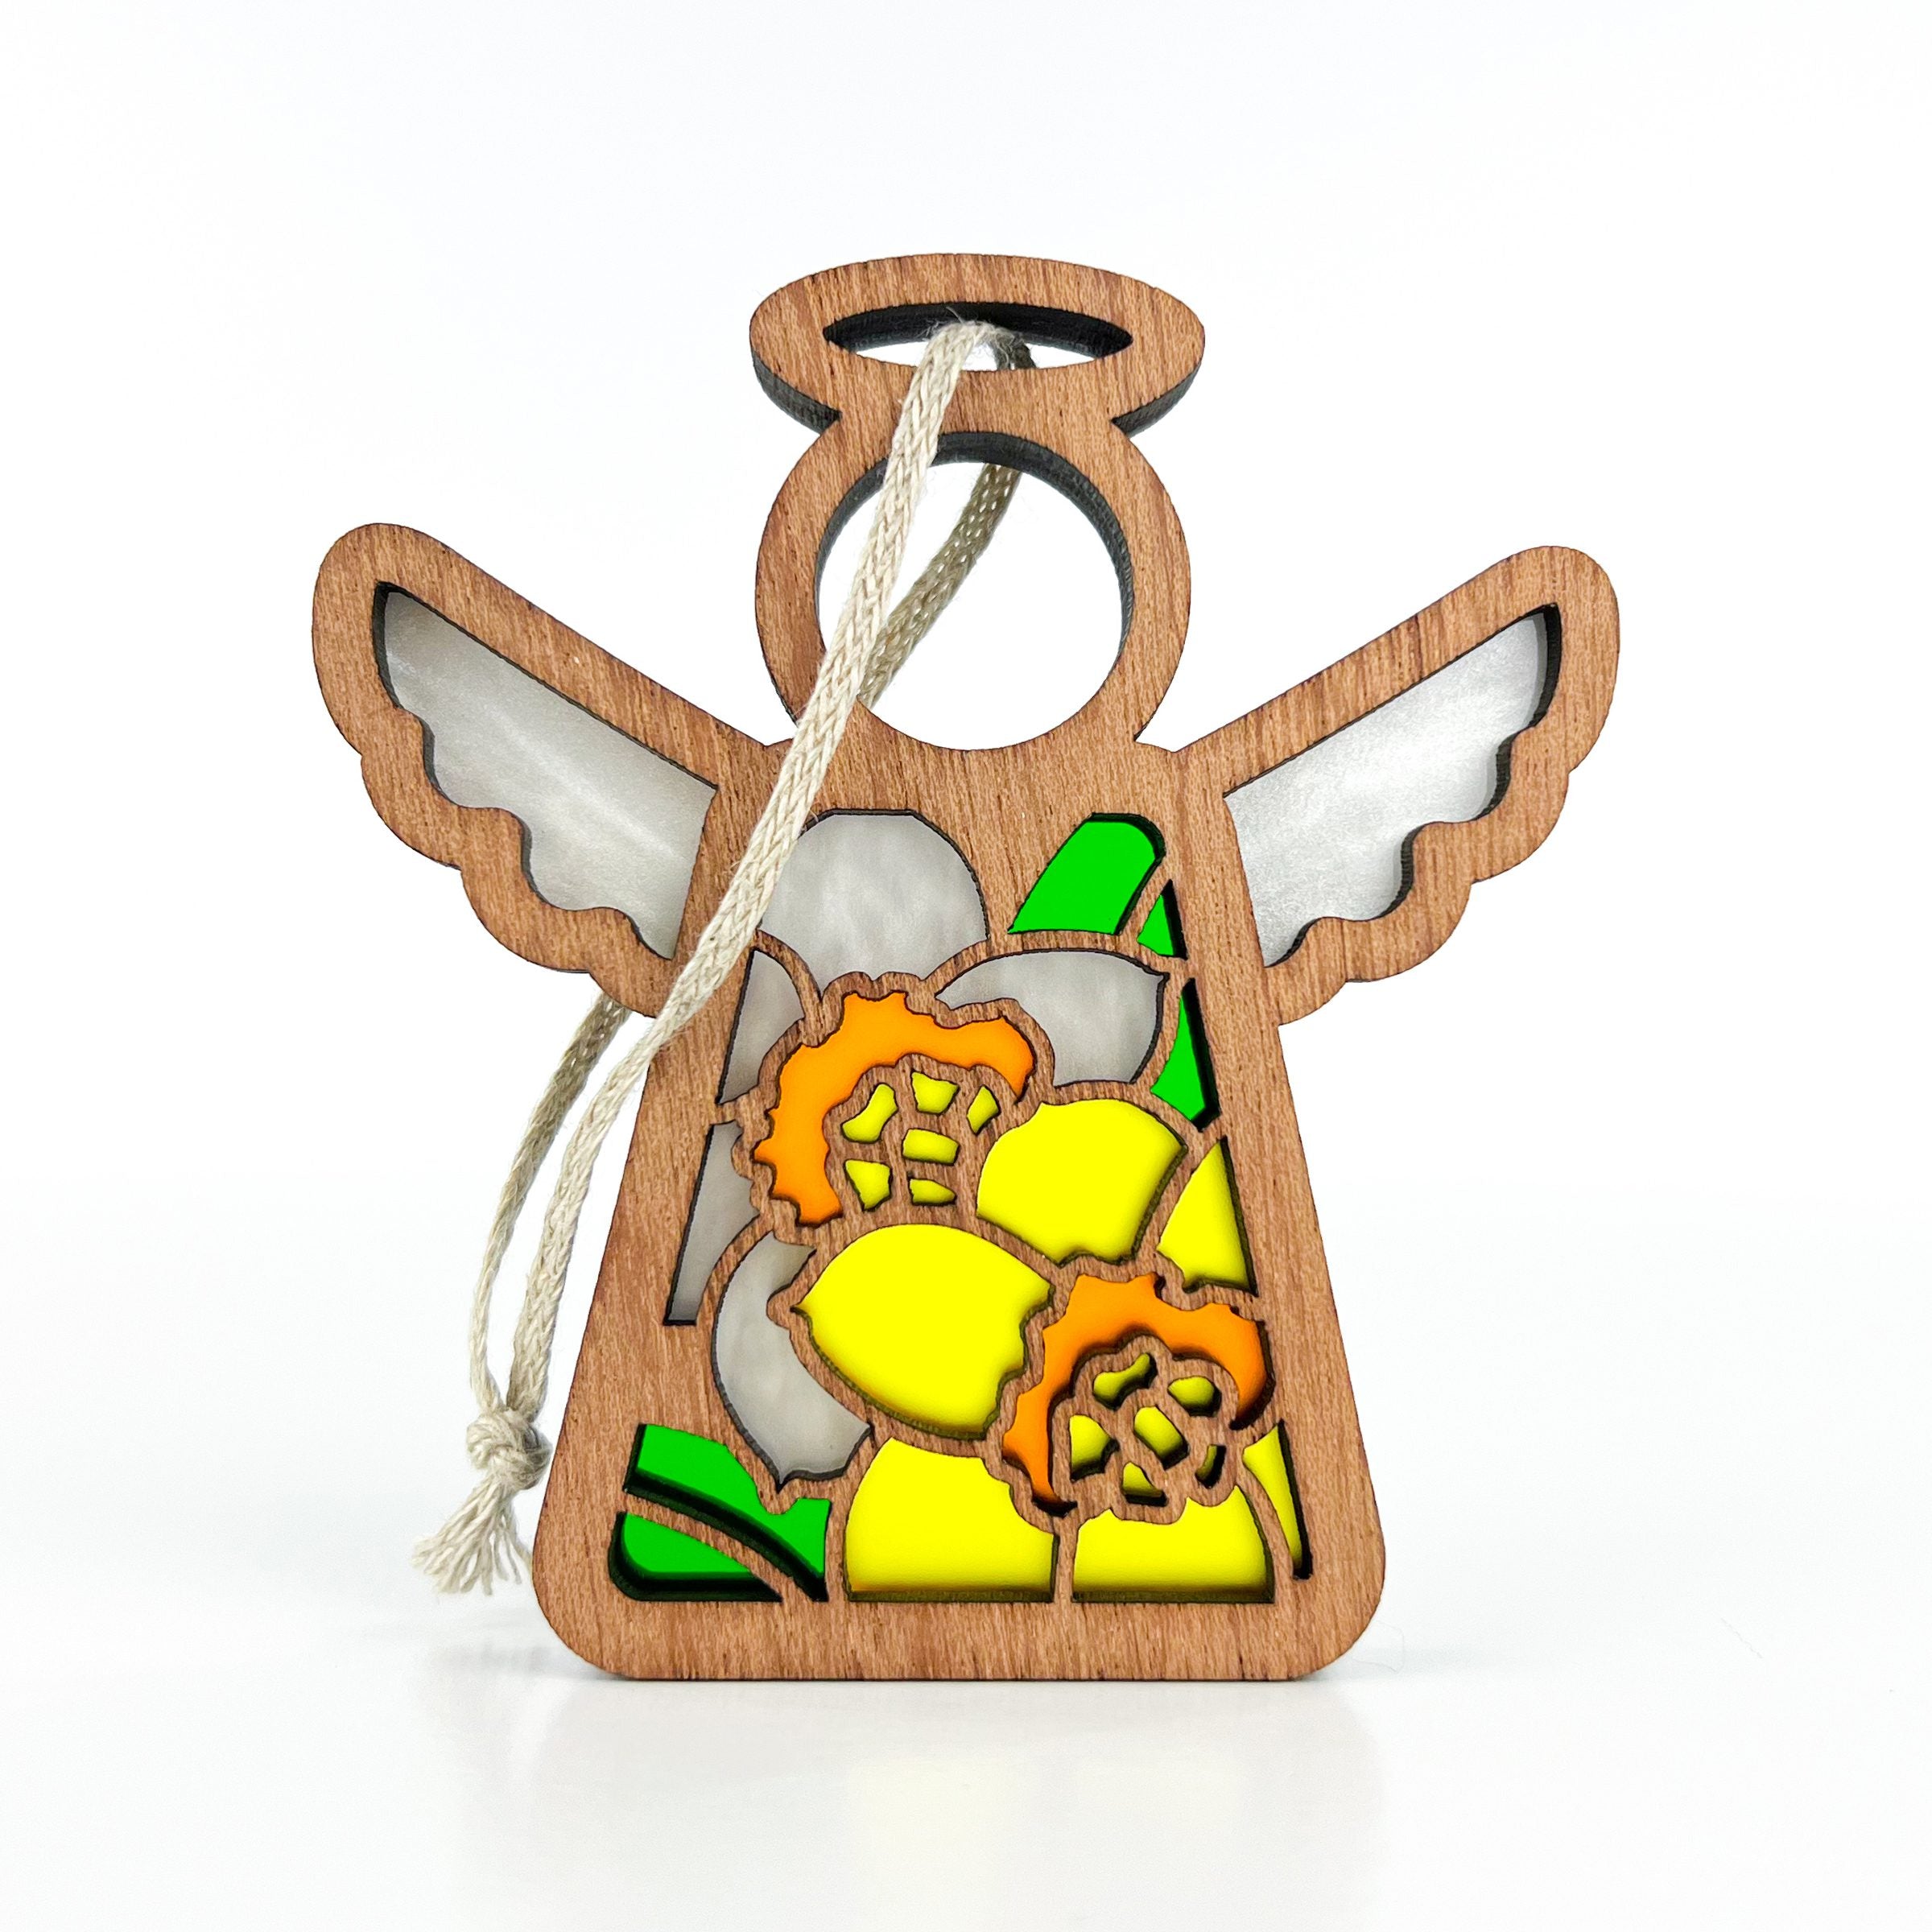 Mother’s Angels® Daffodils Ornament featuring vibrant yellow and green stained glass-inspired motifs, symbolizing the birth flower for the month of March. This handcrafted ornament from Forged Flare® shines with the essence of spring, making it an ideal daffodil gift to capture the season's spirit.